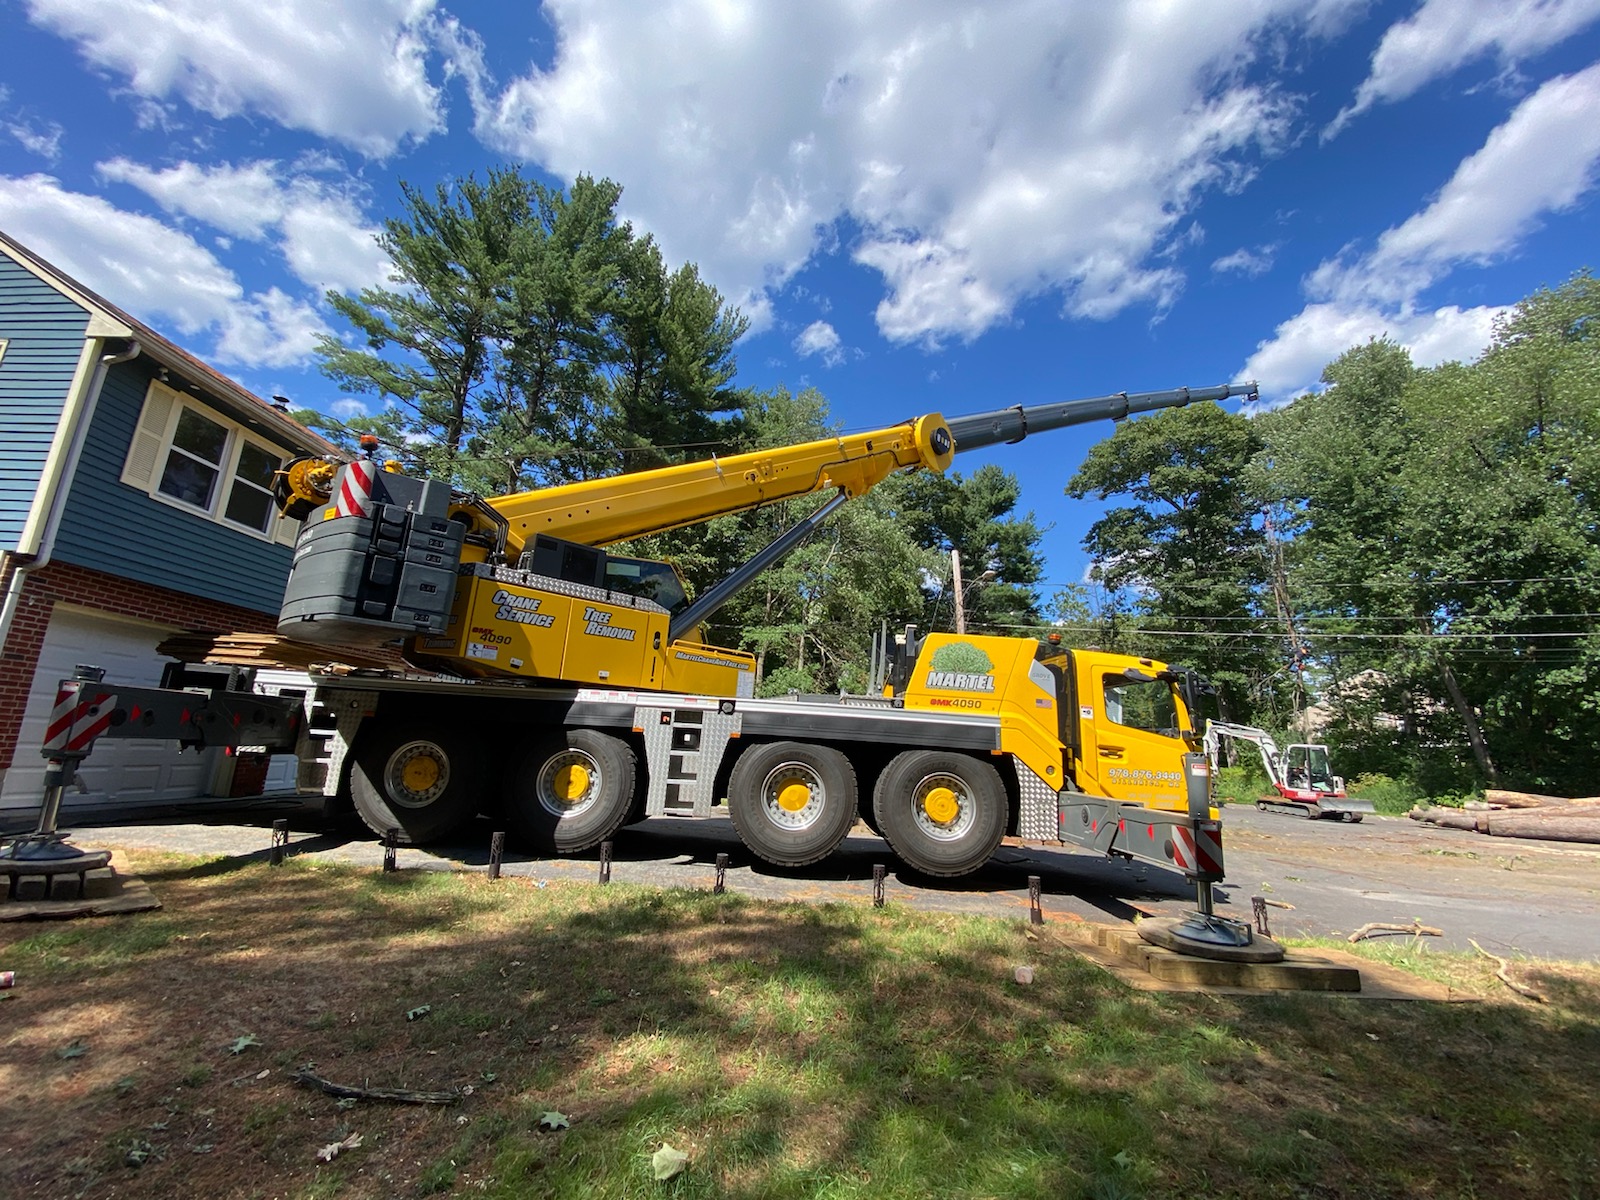 The crew from Martel Crane and Tree removed several trees from this property in Burlington, MA.